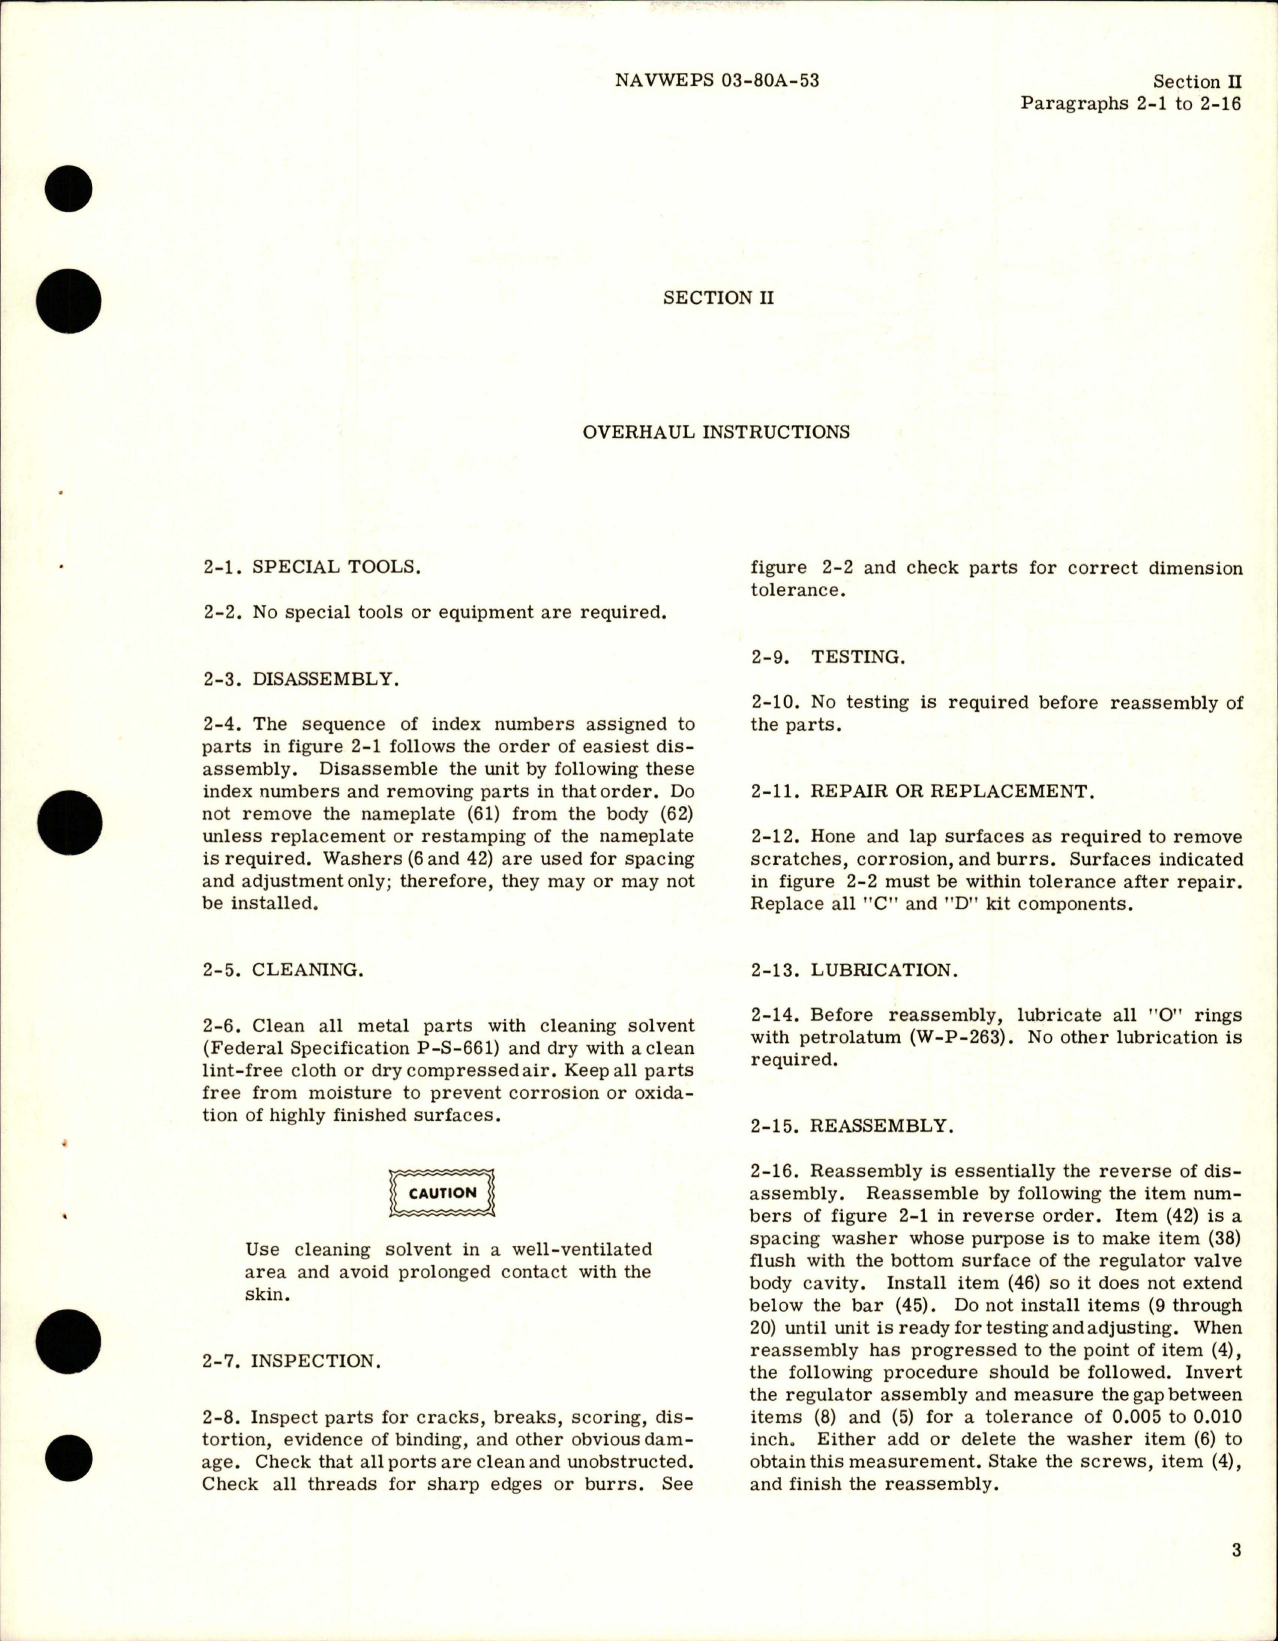 Sample page 5 from AirCorps Library document: Overhaul Instructions for Absolute Air Pressure Regulator - Part 12093 